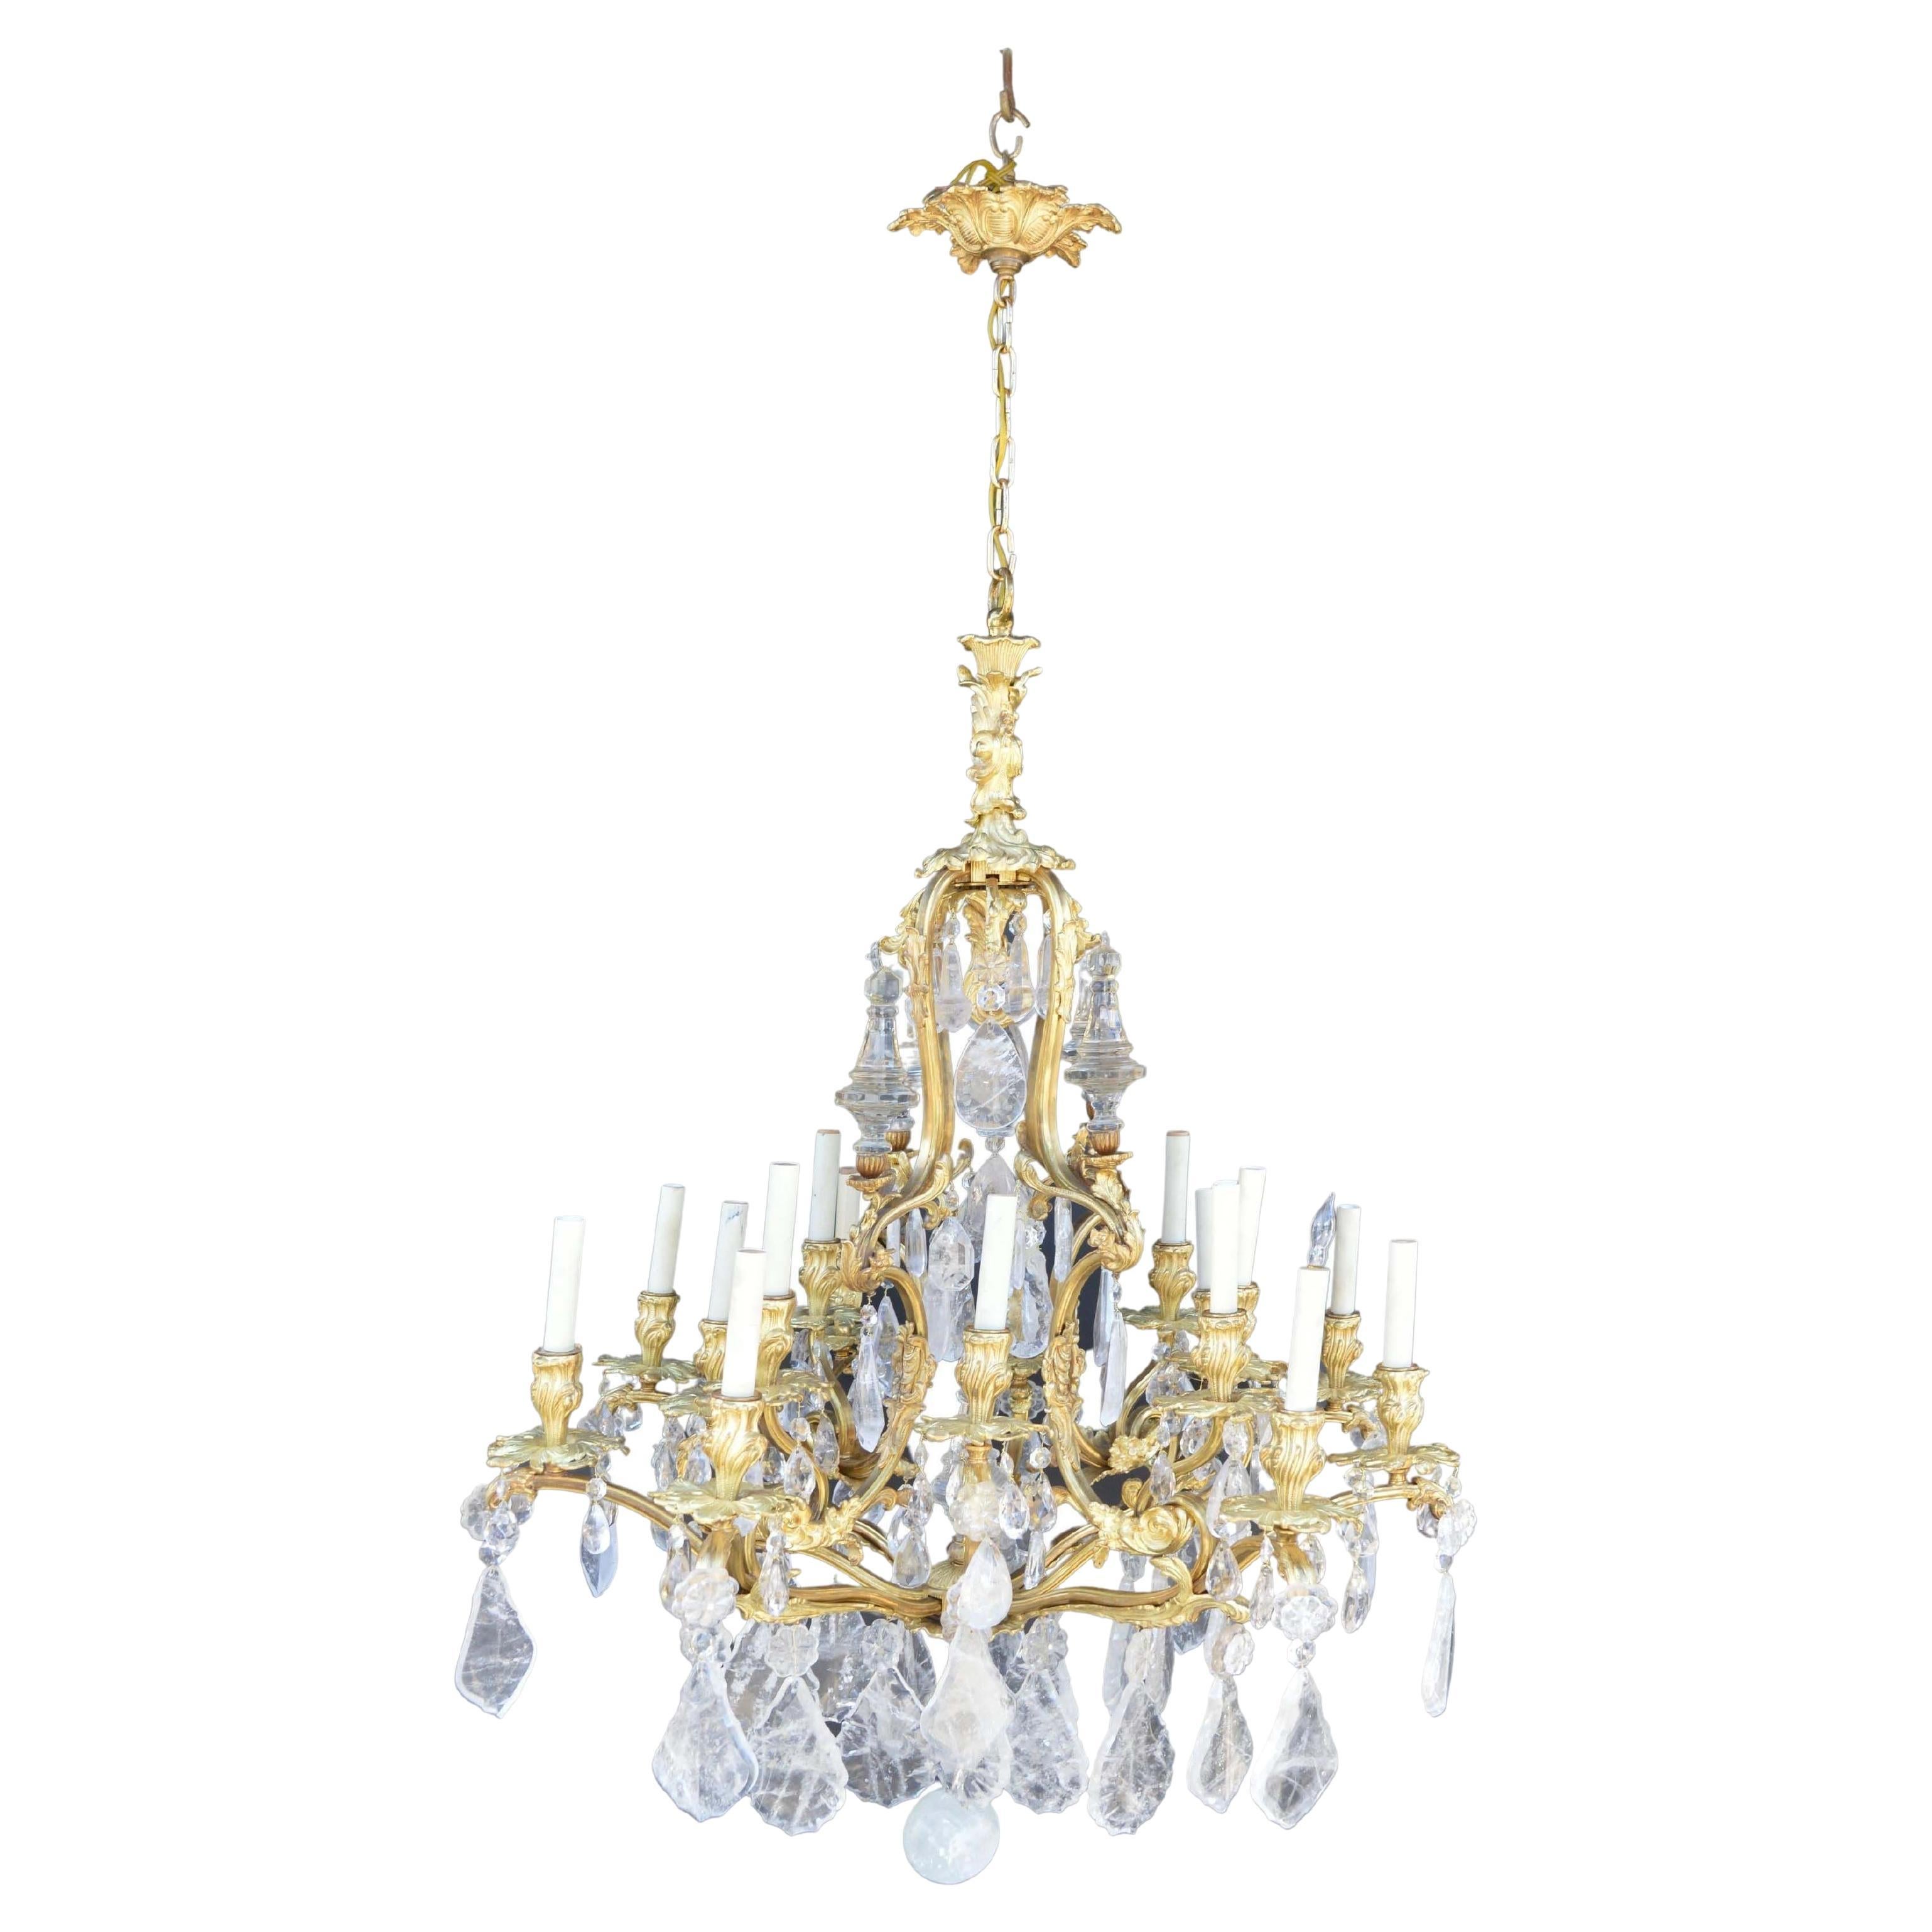 Late 19th Century Gilt Bronze and Rock Crystal Chandelier